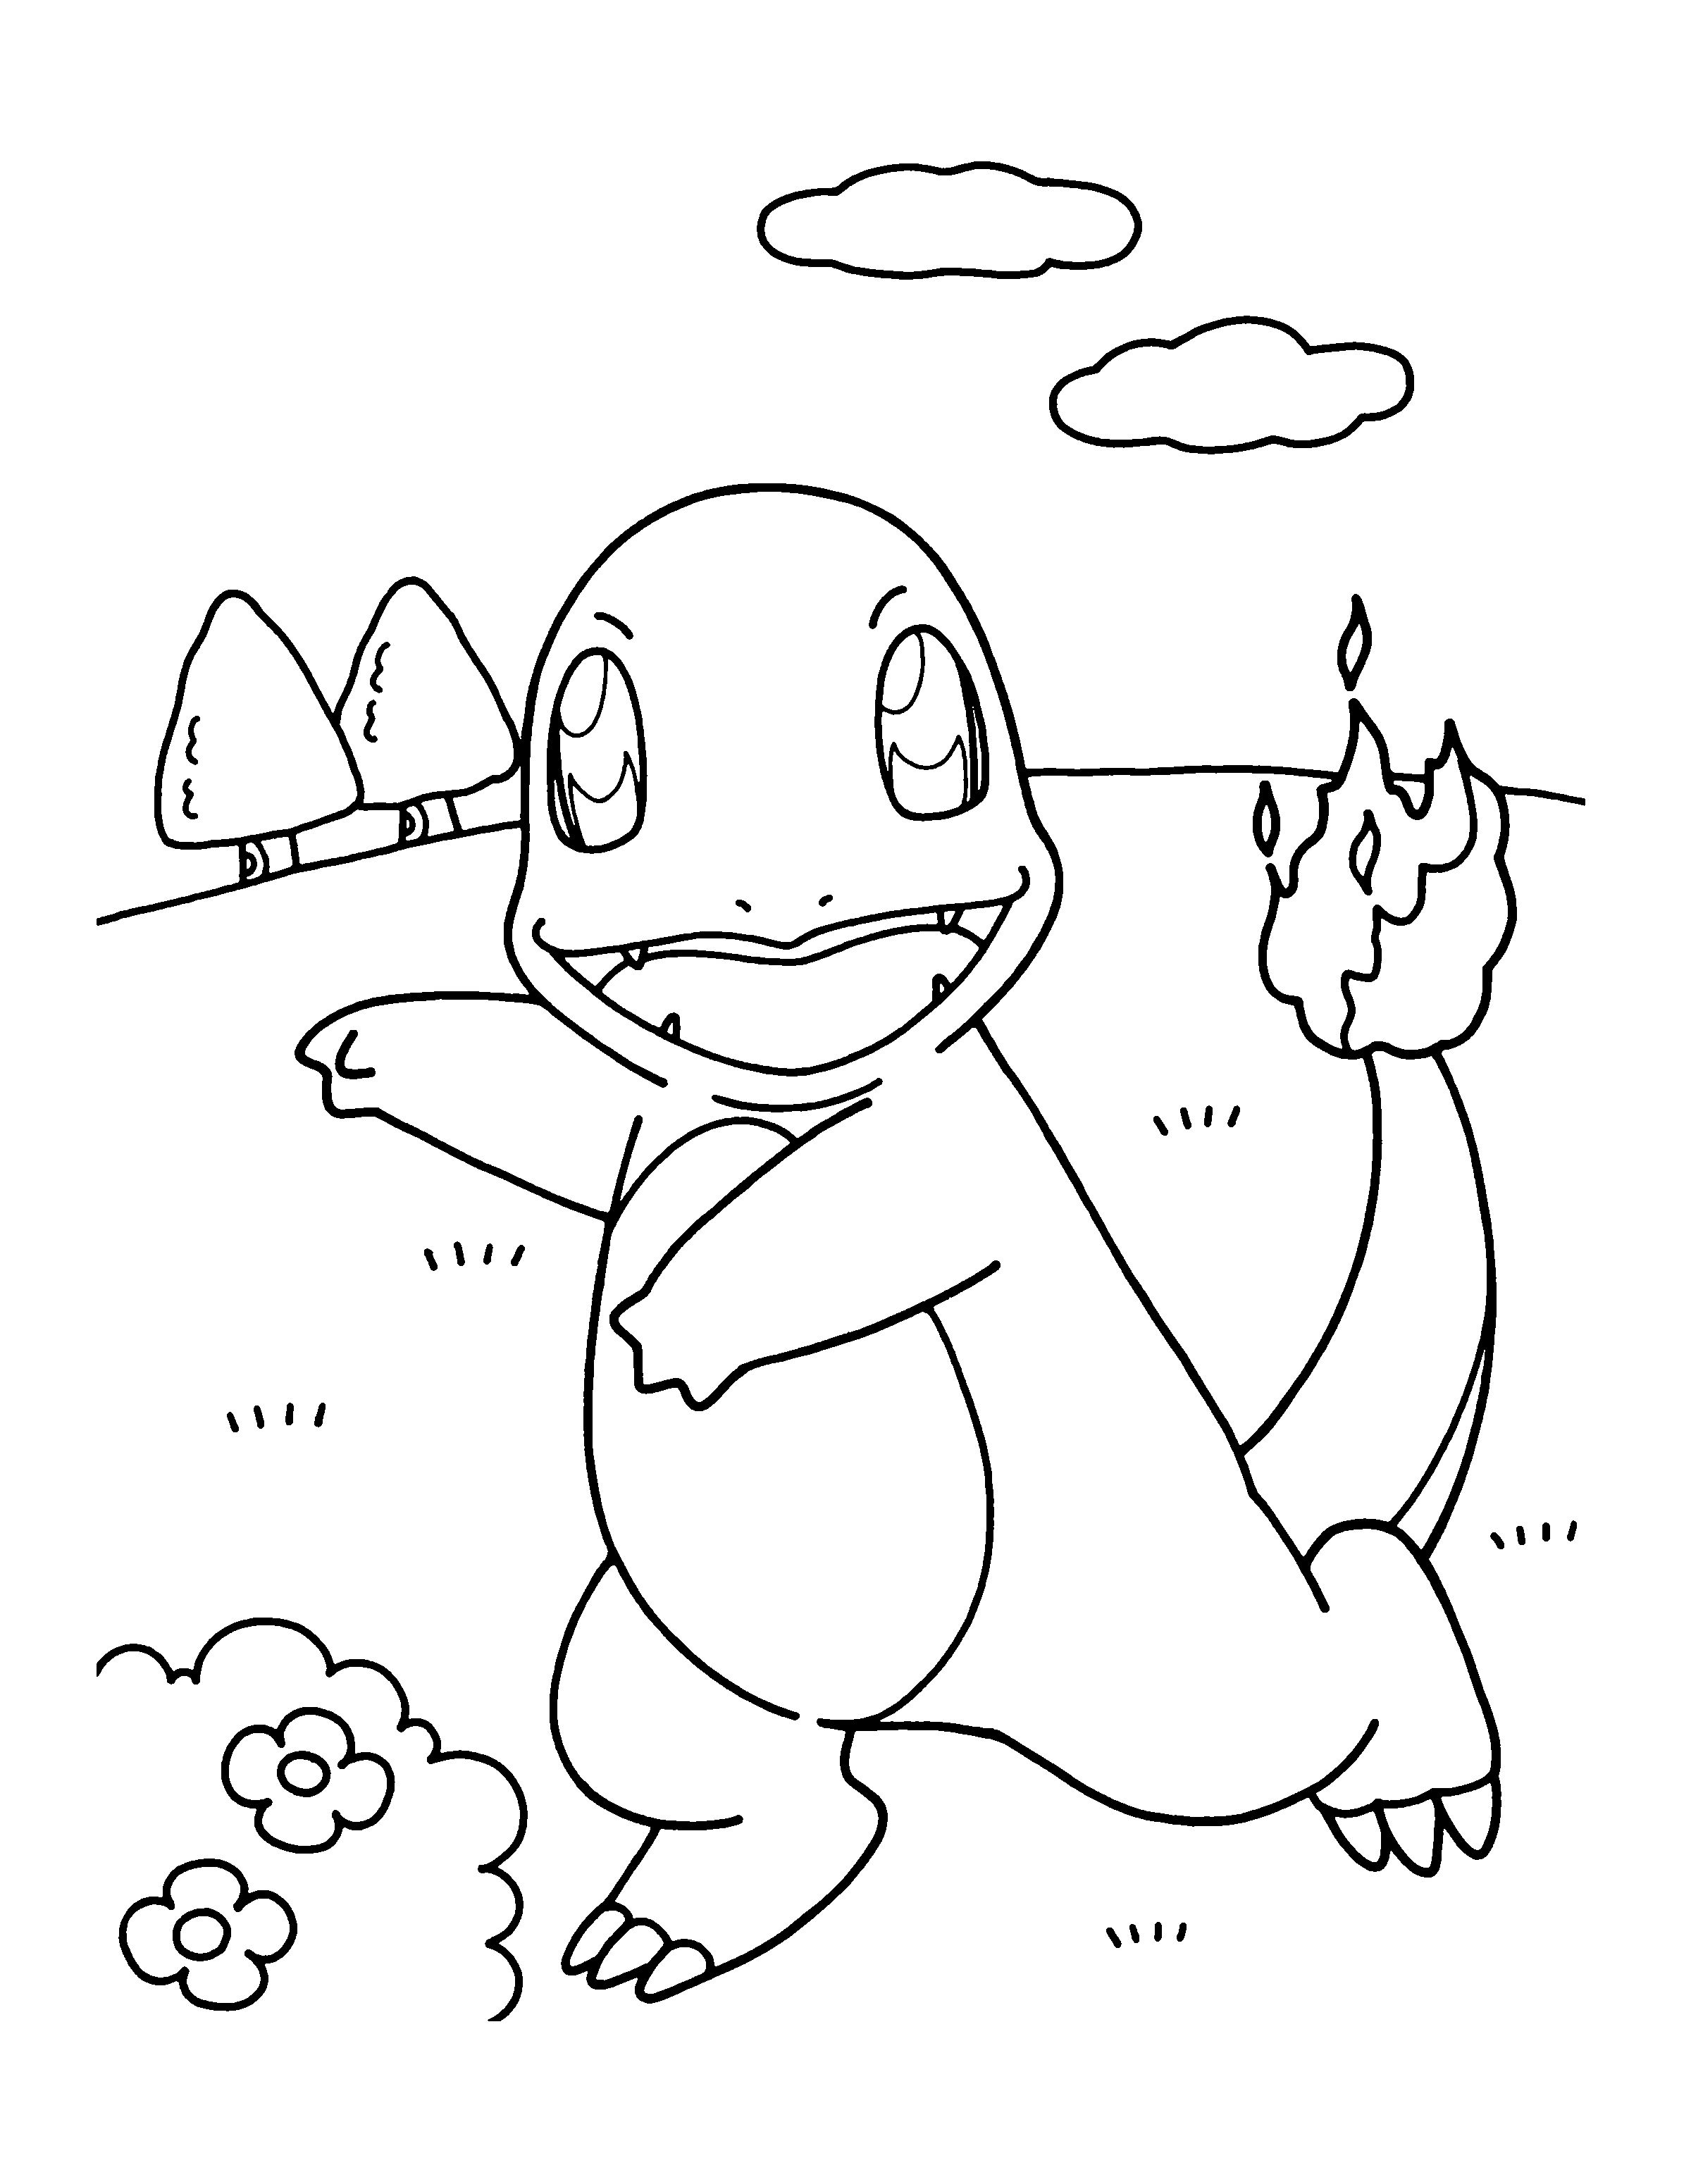 pokemon charmander coloring pages charmander coloring pages to download and print for free pokemon pages charmander coloring 